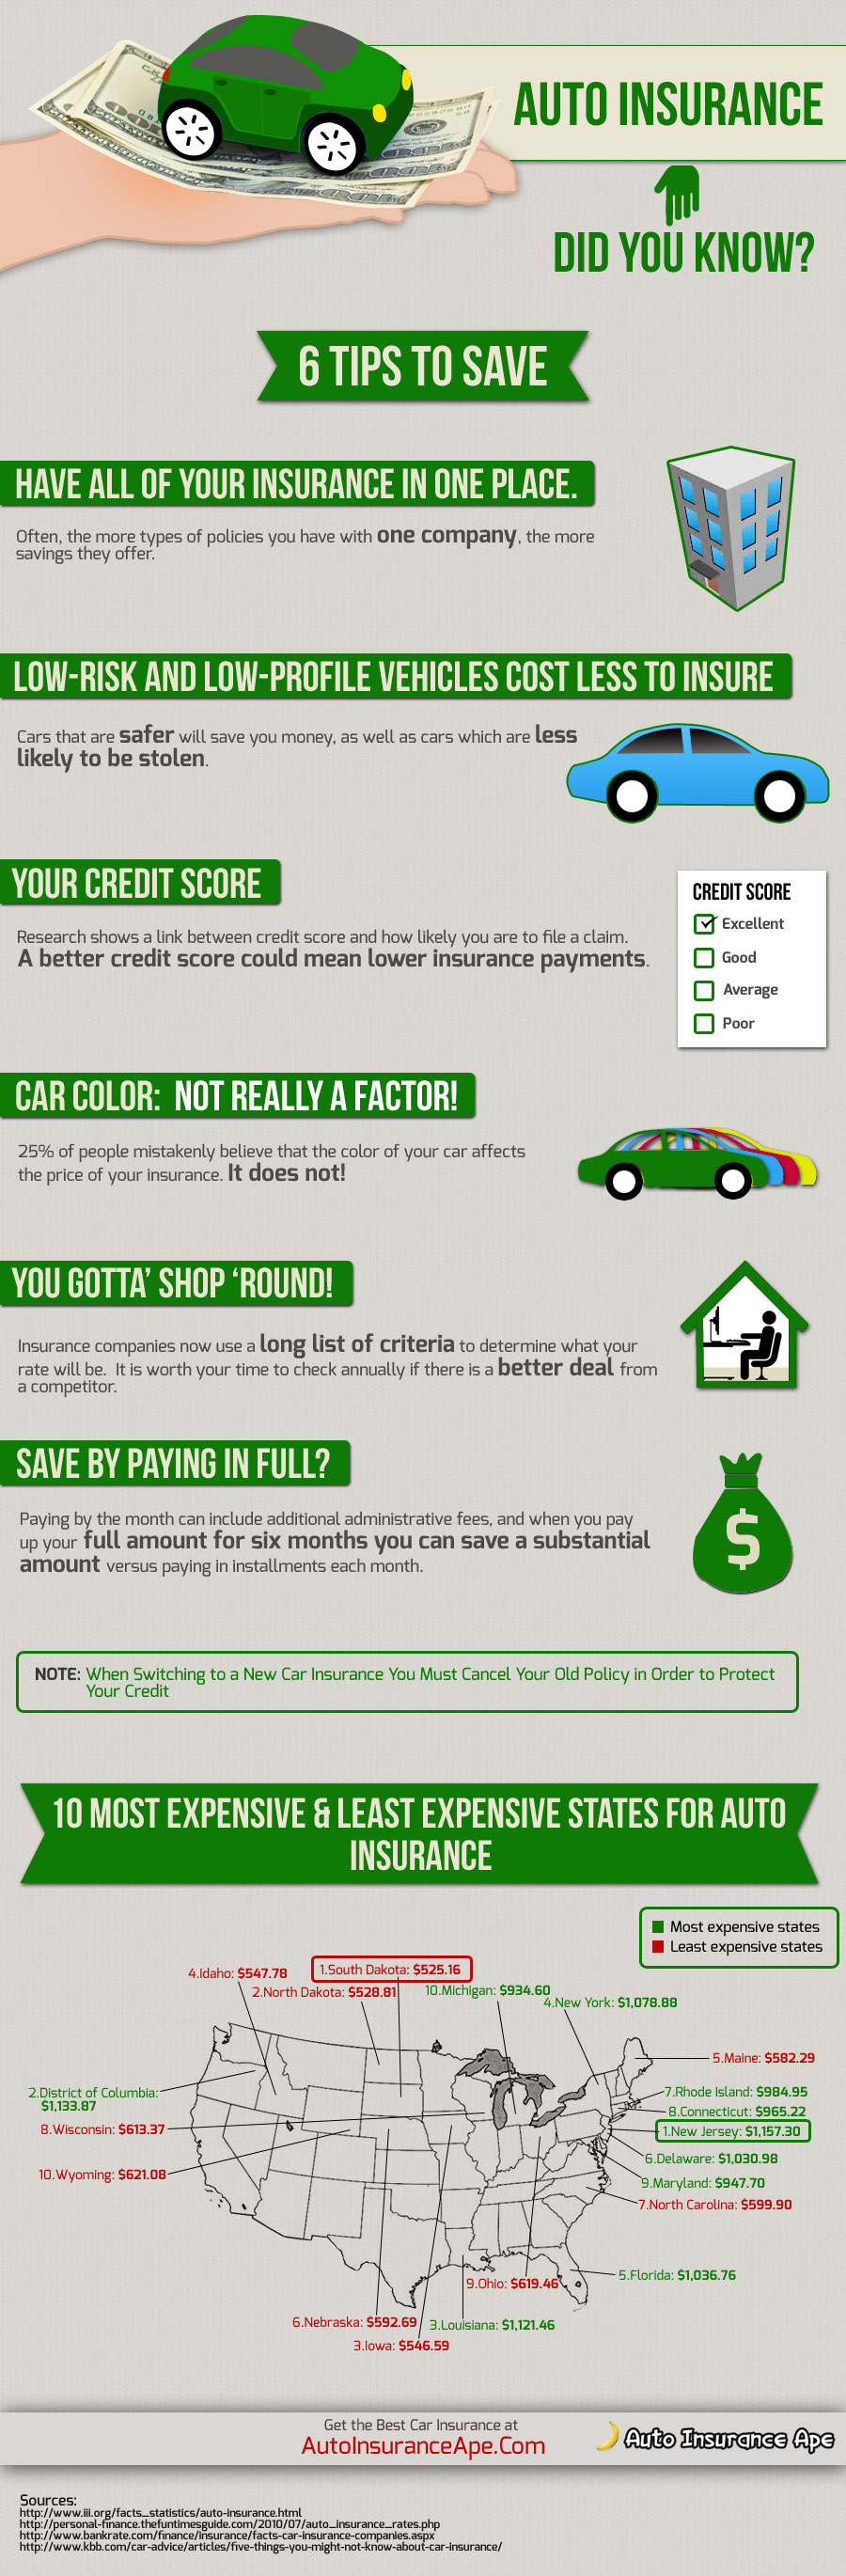 6 Tips to Save on Auto Insurance